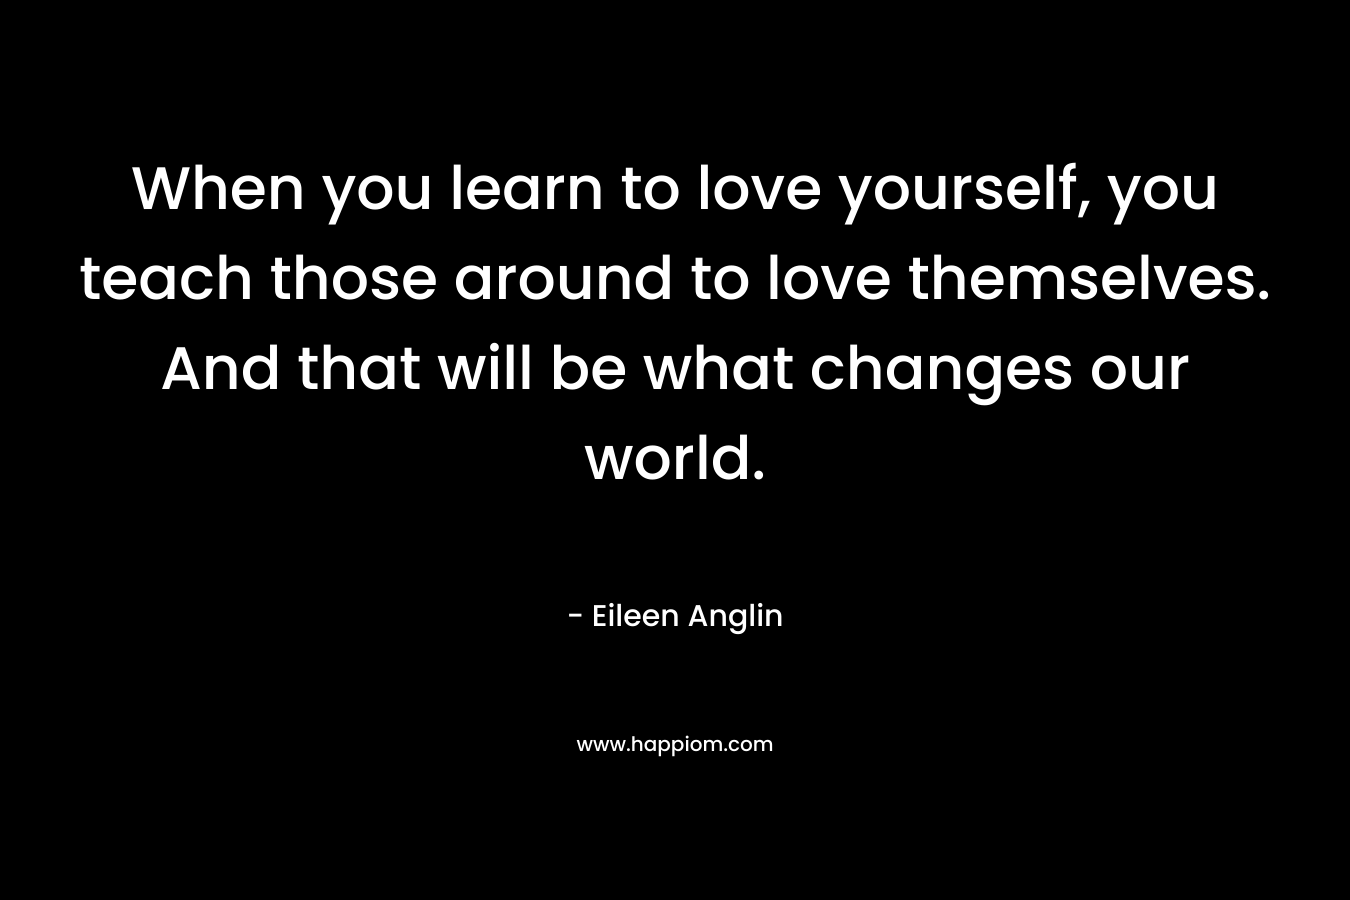 When you learn to love yourself, you teach those around to love themselves. And that will be what changes our world. – Eileen Anglin